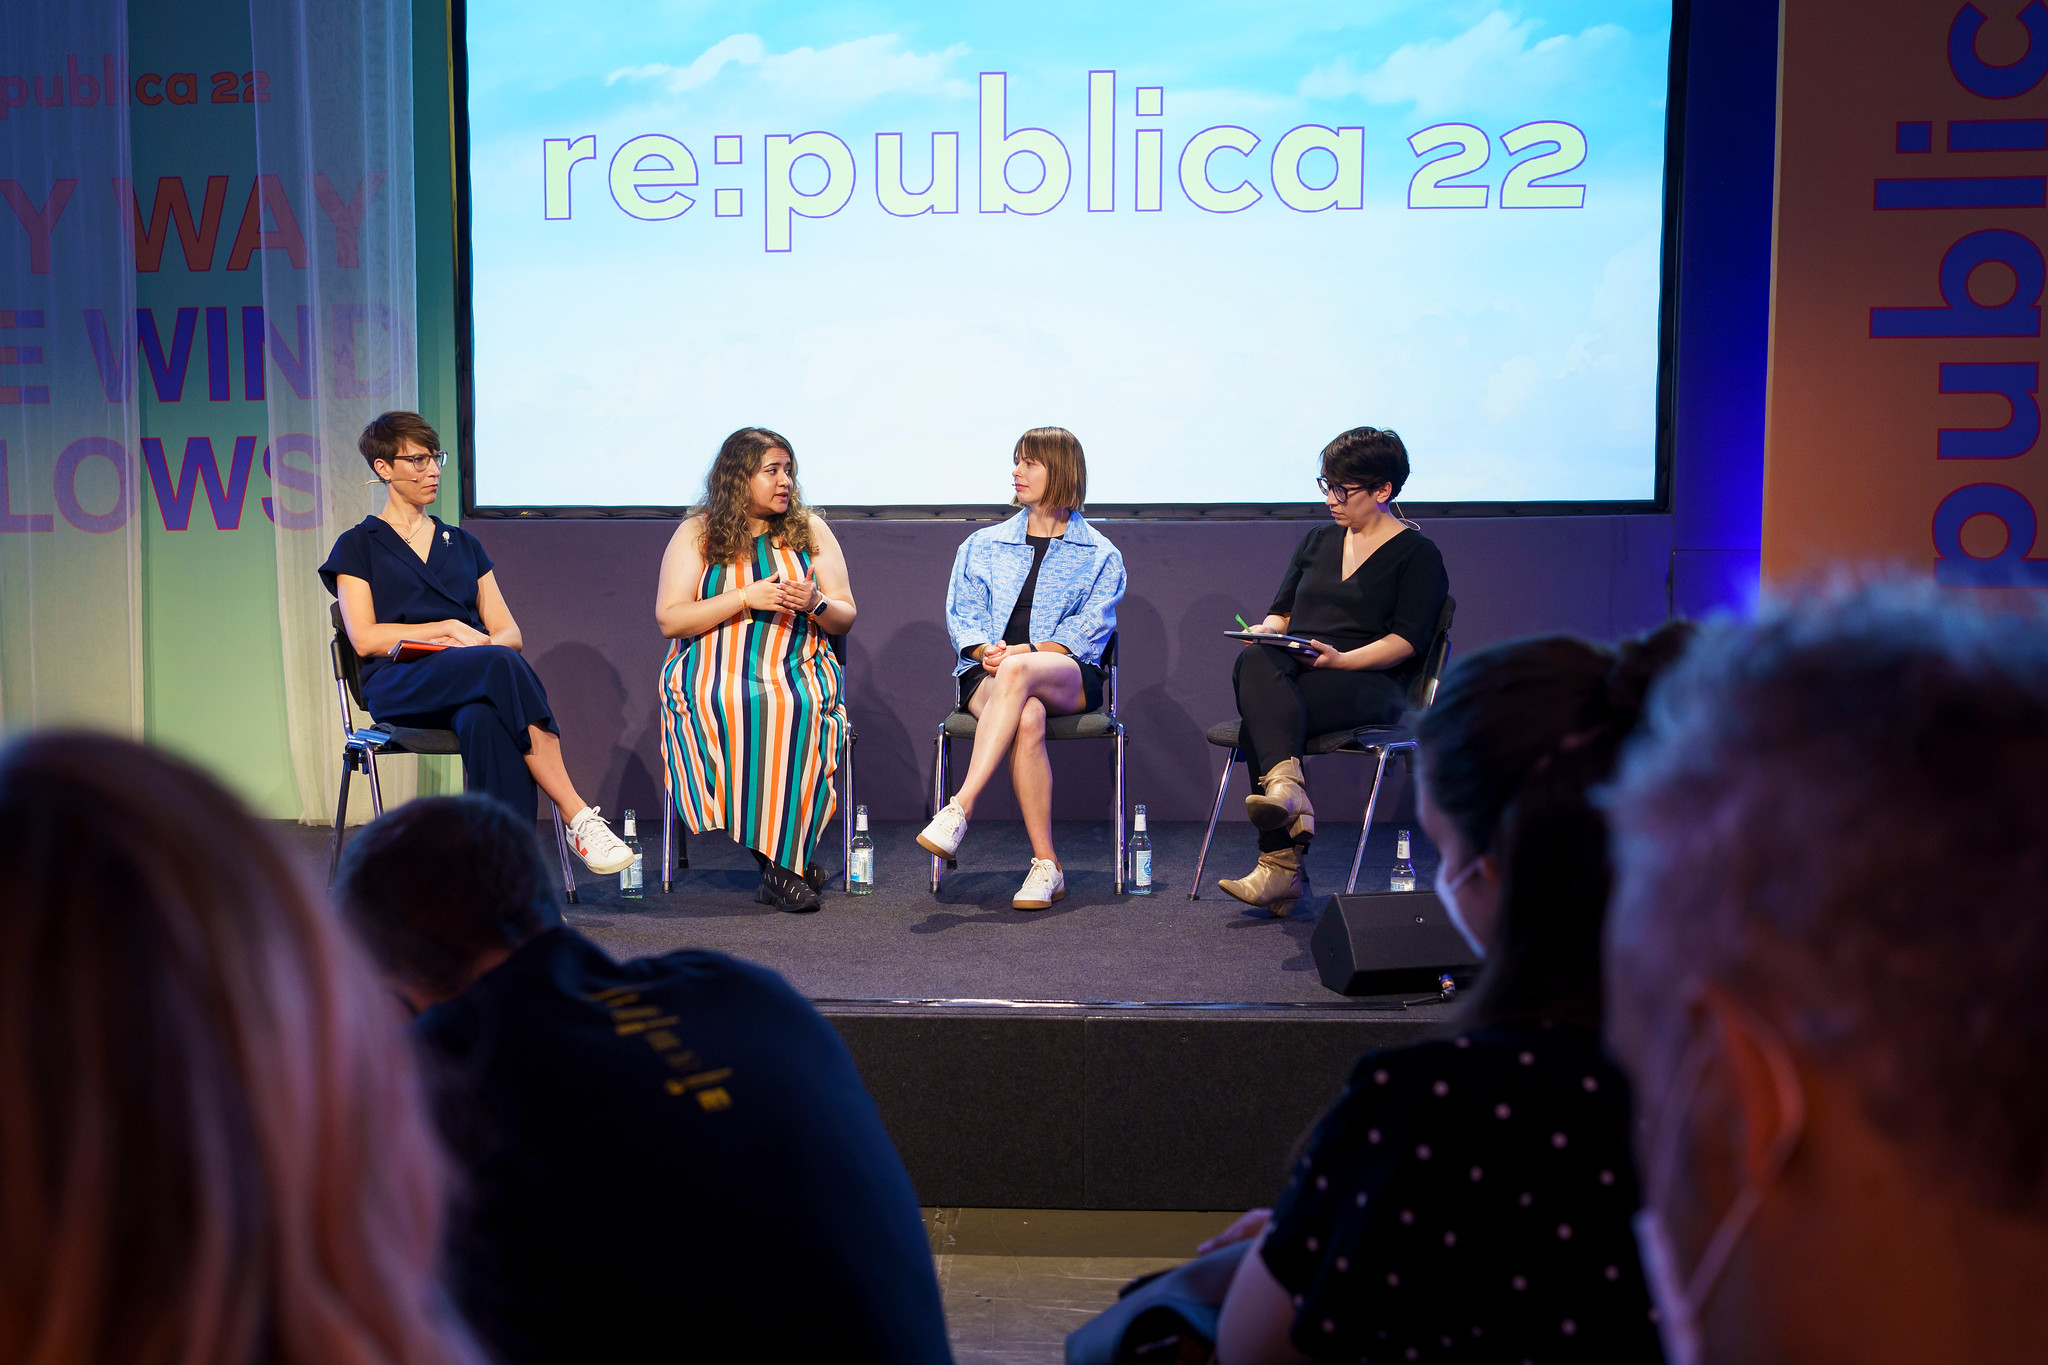 The photo shows the four panelists, Ellen Ehmke, Hera Hussain, Michelle Thorne and Julia Kloiber sitting on stage with a large sign behind them depicting the logo of republica.